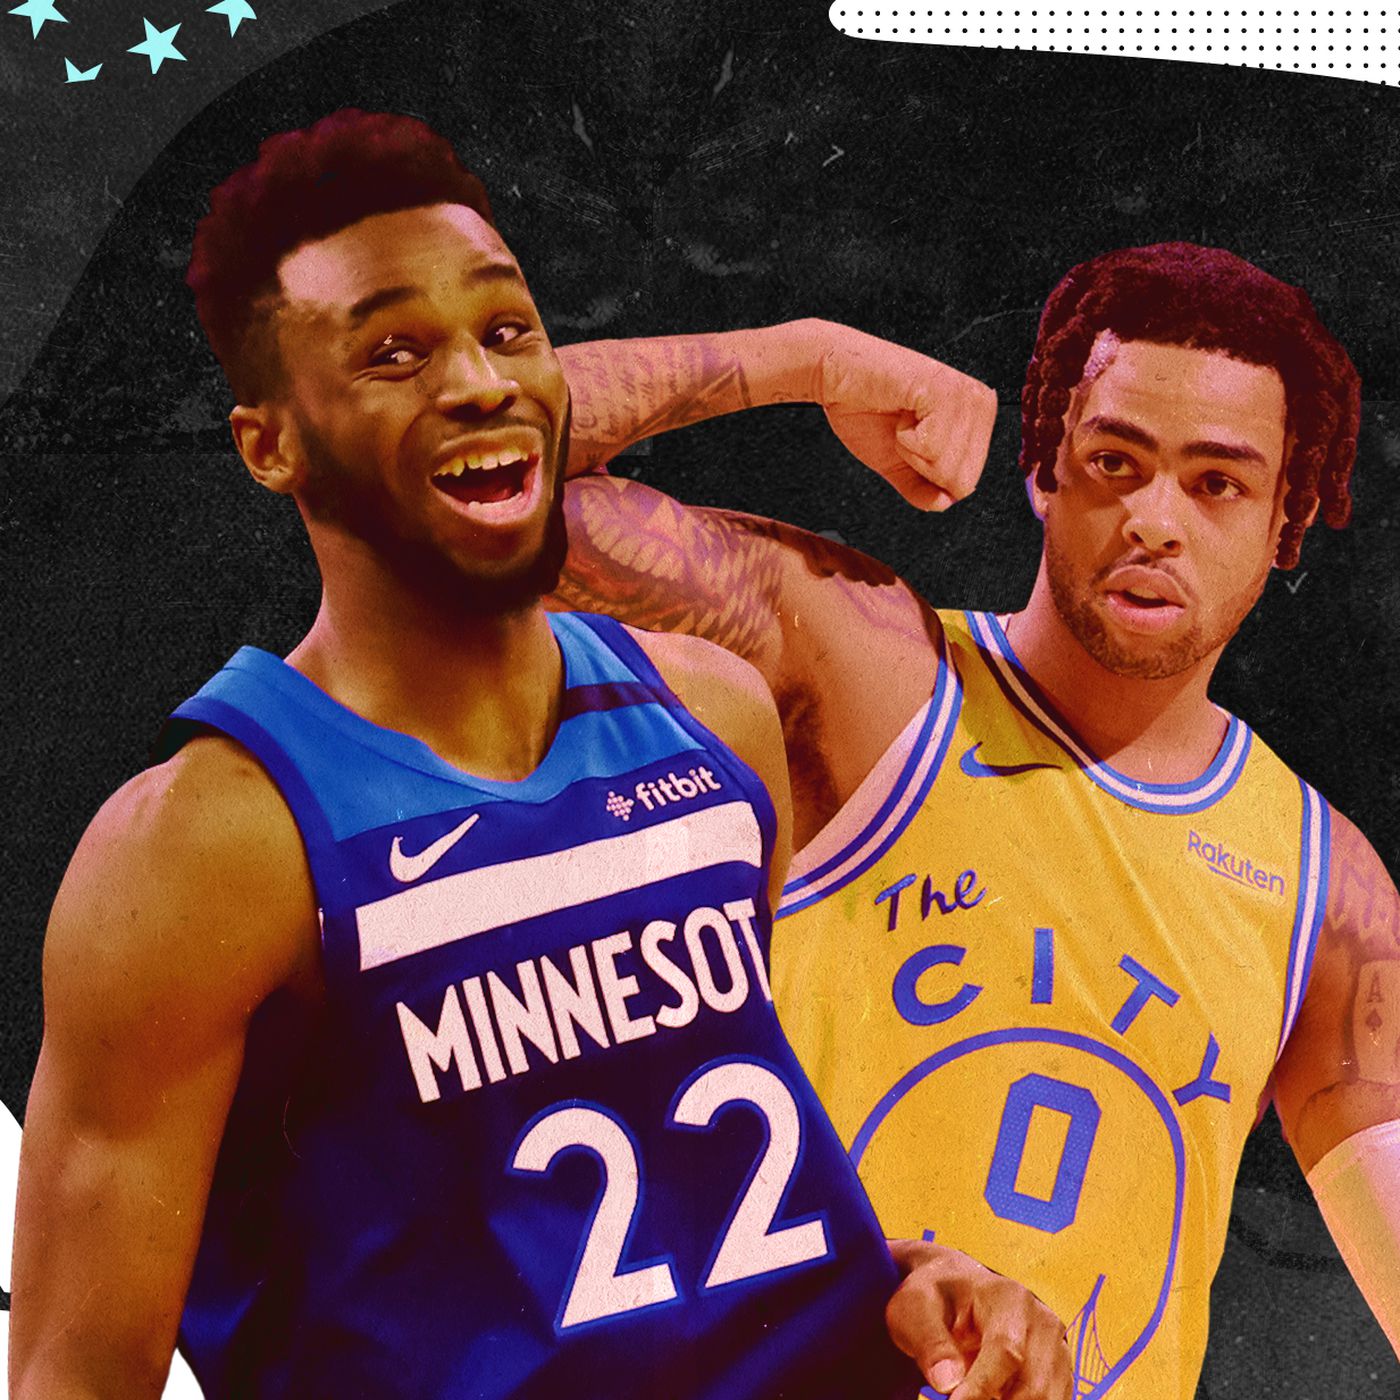 NBA Rumors: D'Angelo Russell headed to Warriors on sign-and-trade